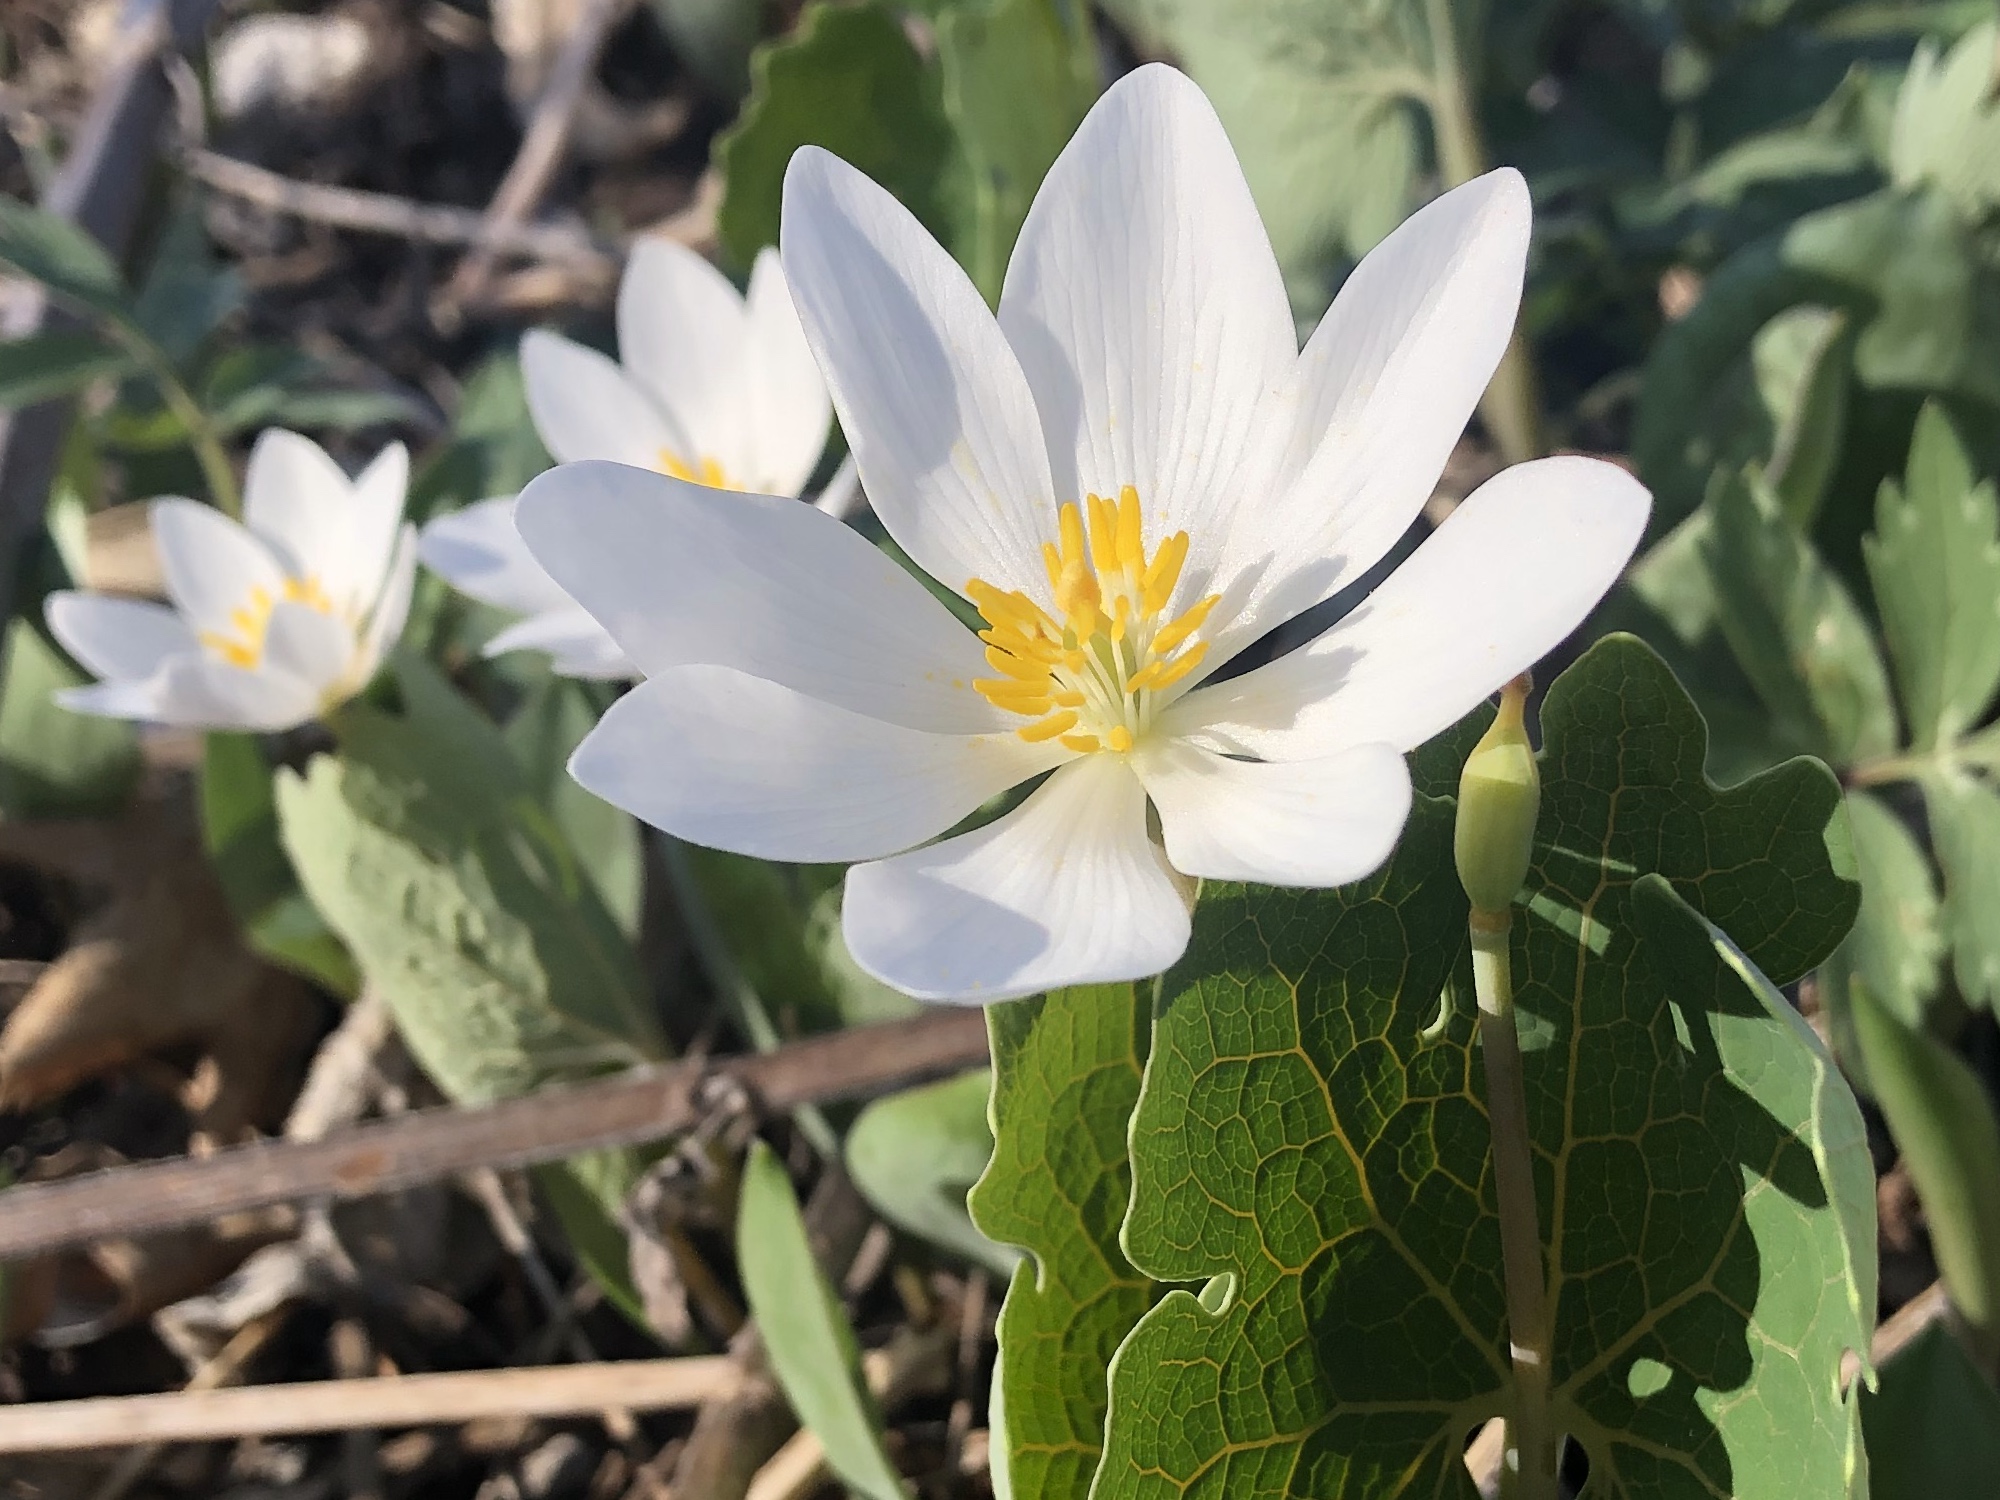 Bloodroot photo taken on April 15, 2023 in Madison, Wisconsin near Council Ring.